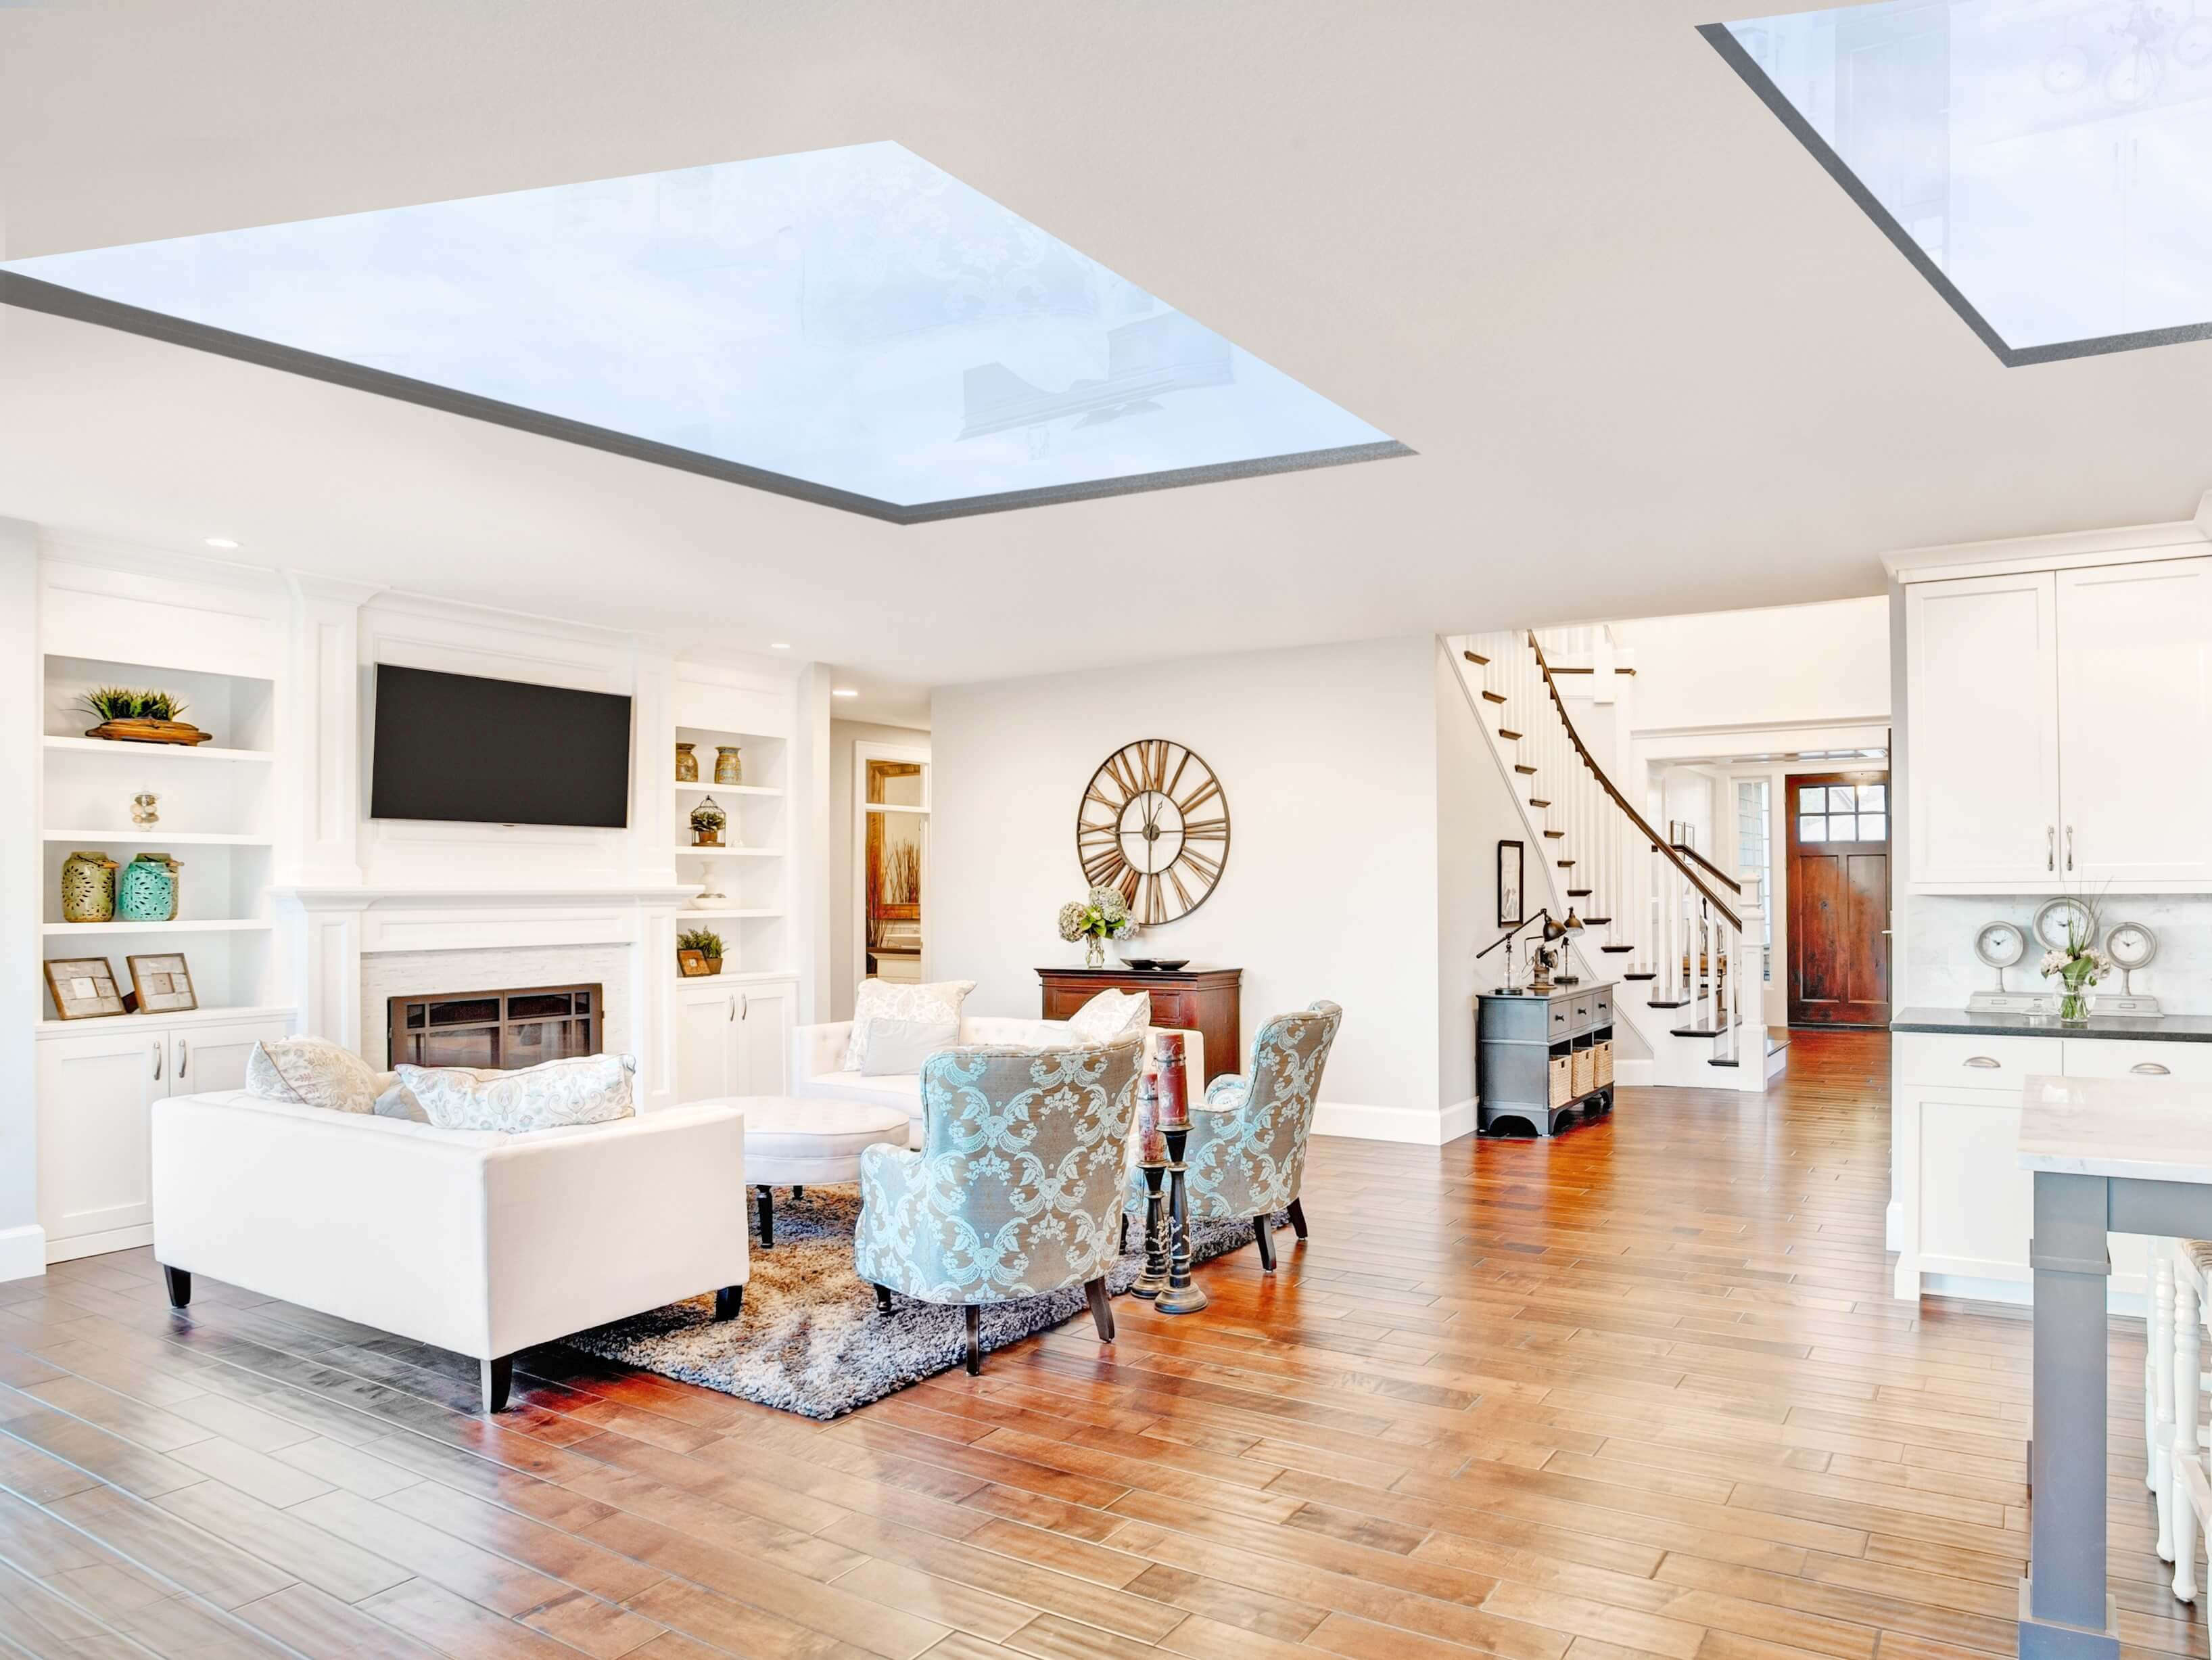 The Difference Between Rooflights and Skylights